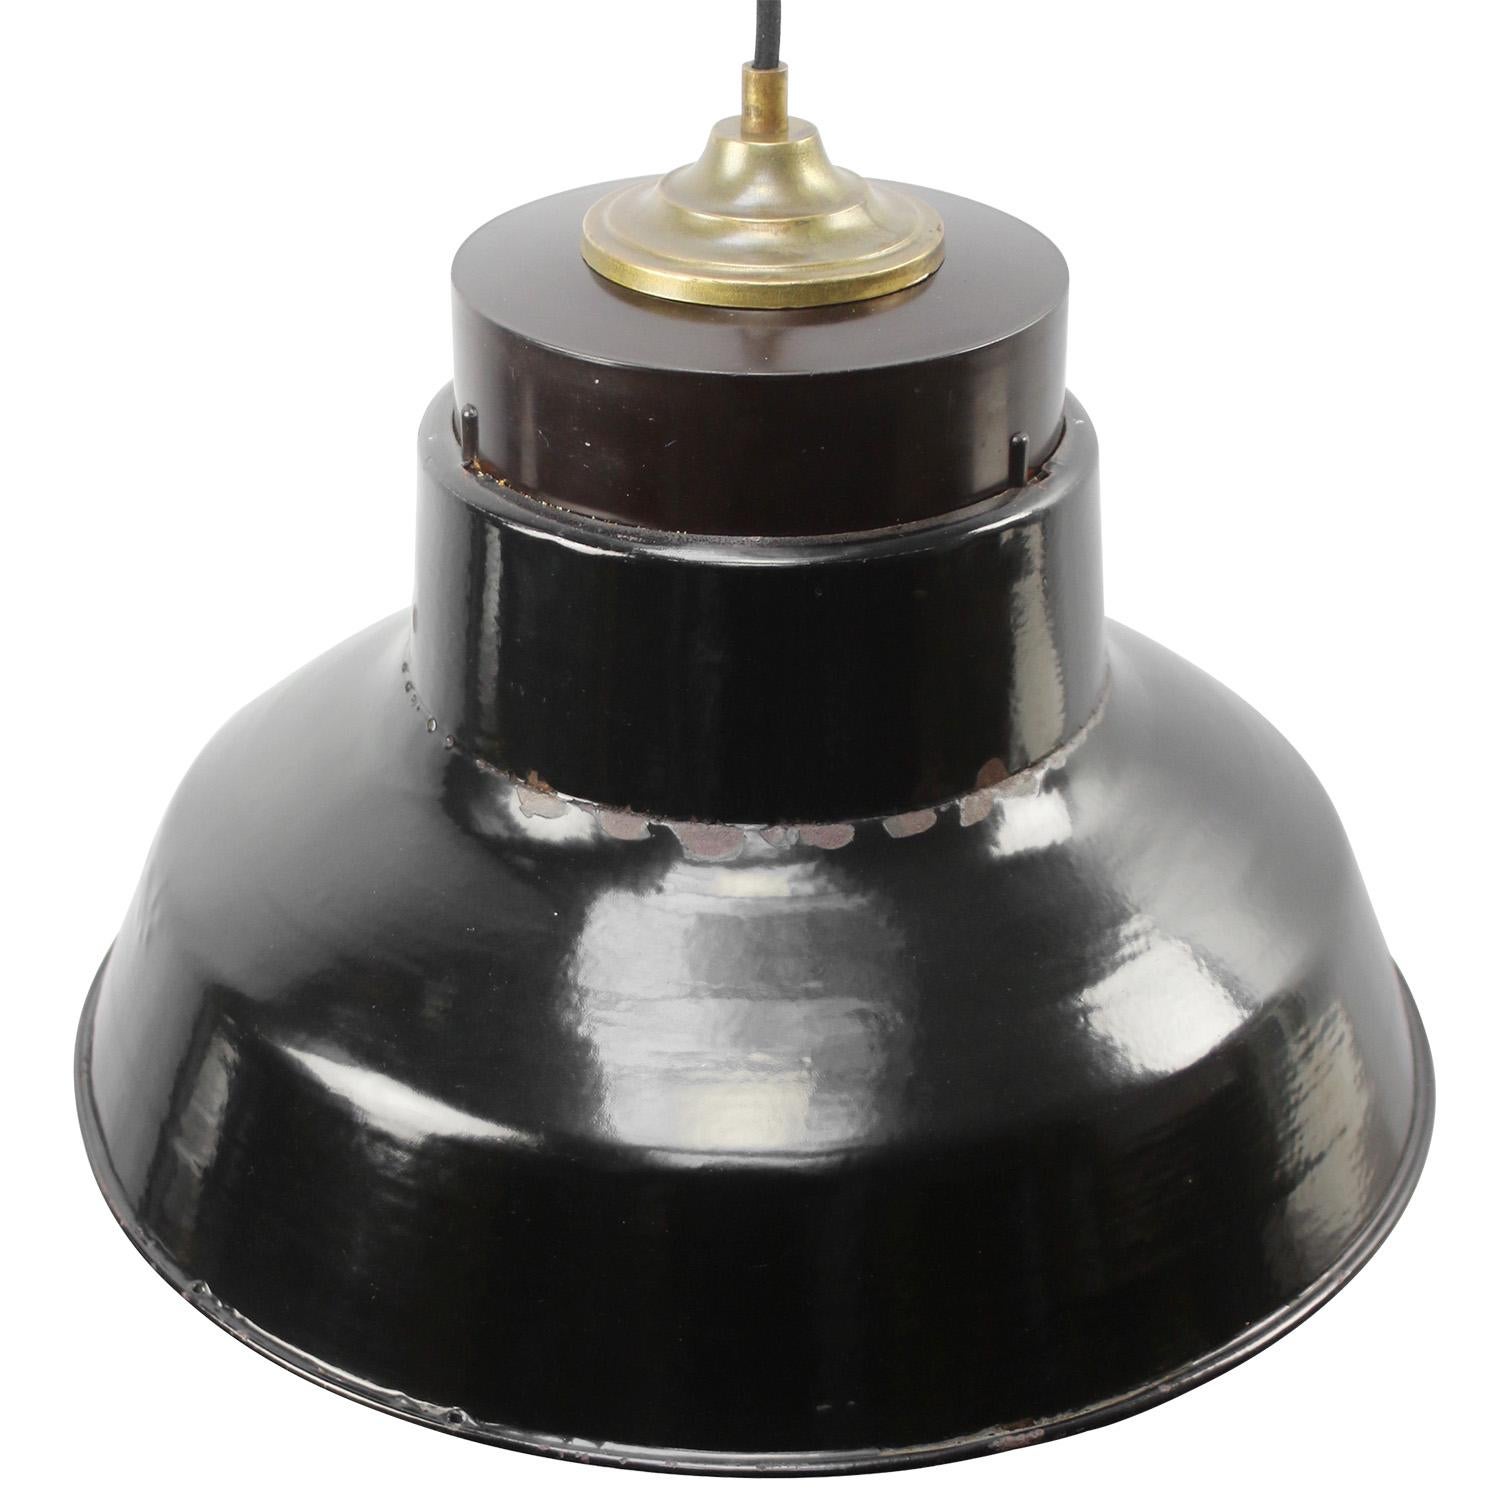 Industrial light. Black enamel white interior.
Bakelite and brass top. Clear glass

Weight: 3.30 kg / 7.3 lb

Priced per individual item. All lamps have been made suitable by international standards for incandescent light bulbs, energy-efficient and